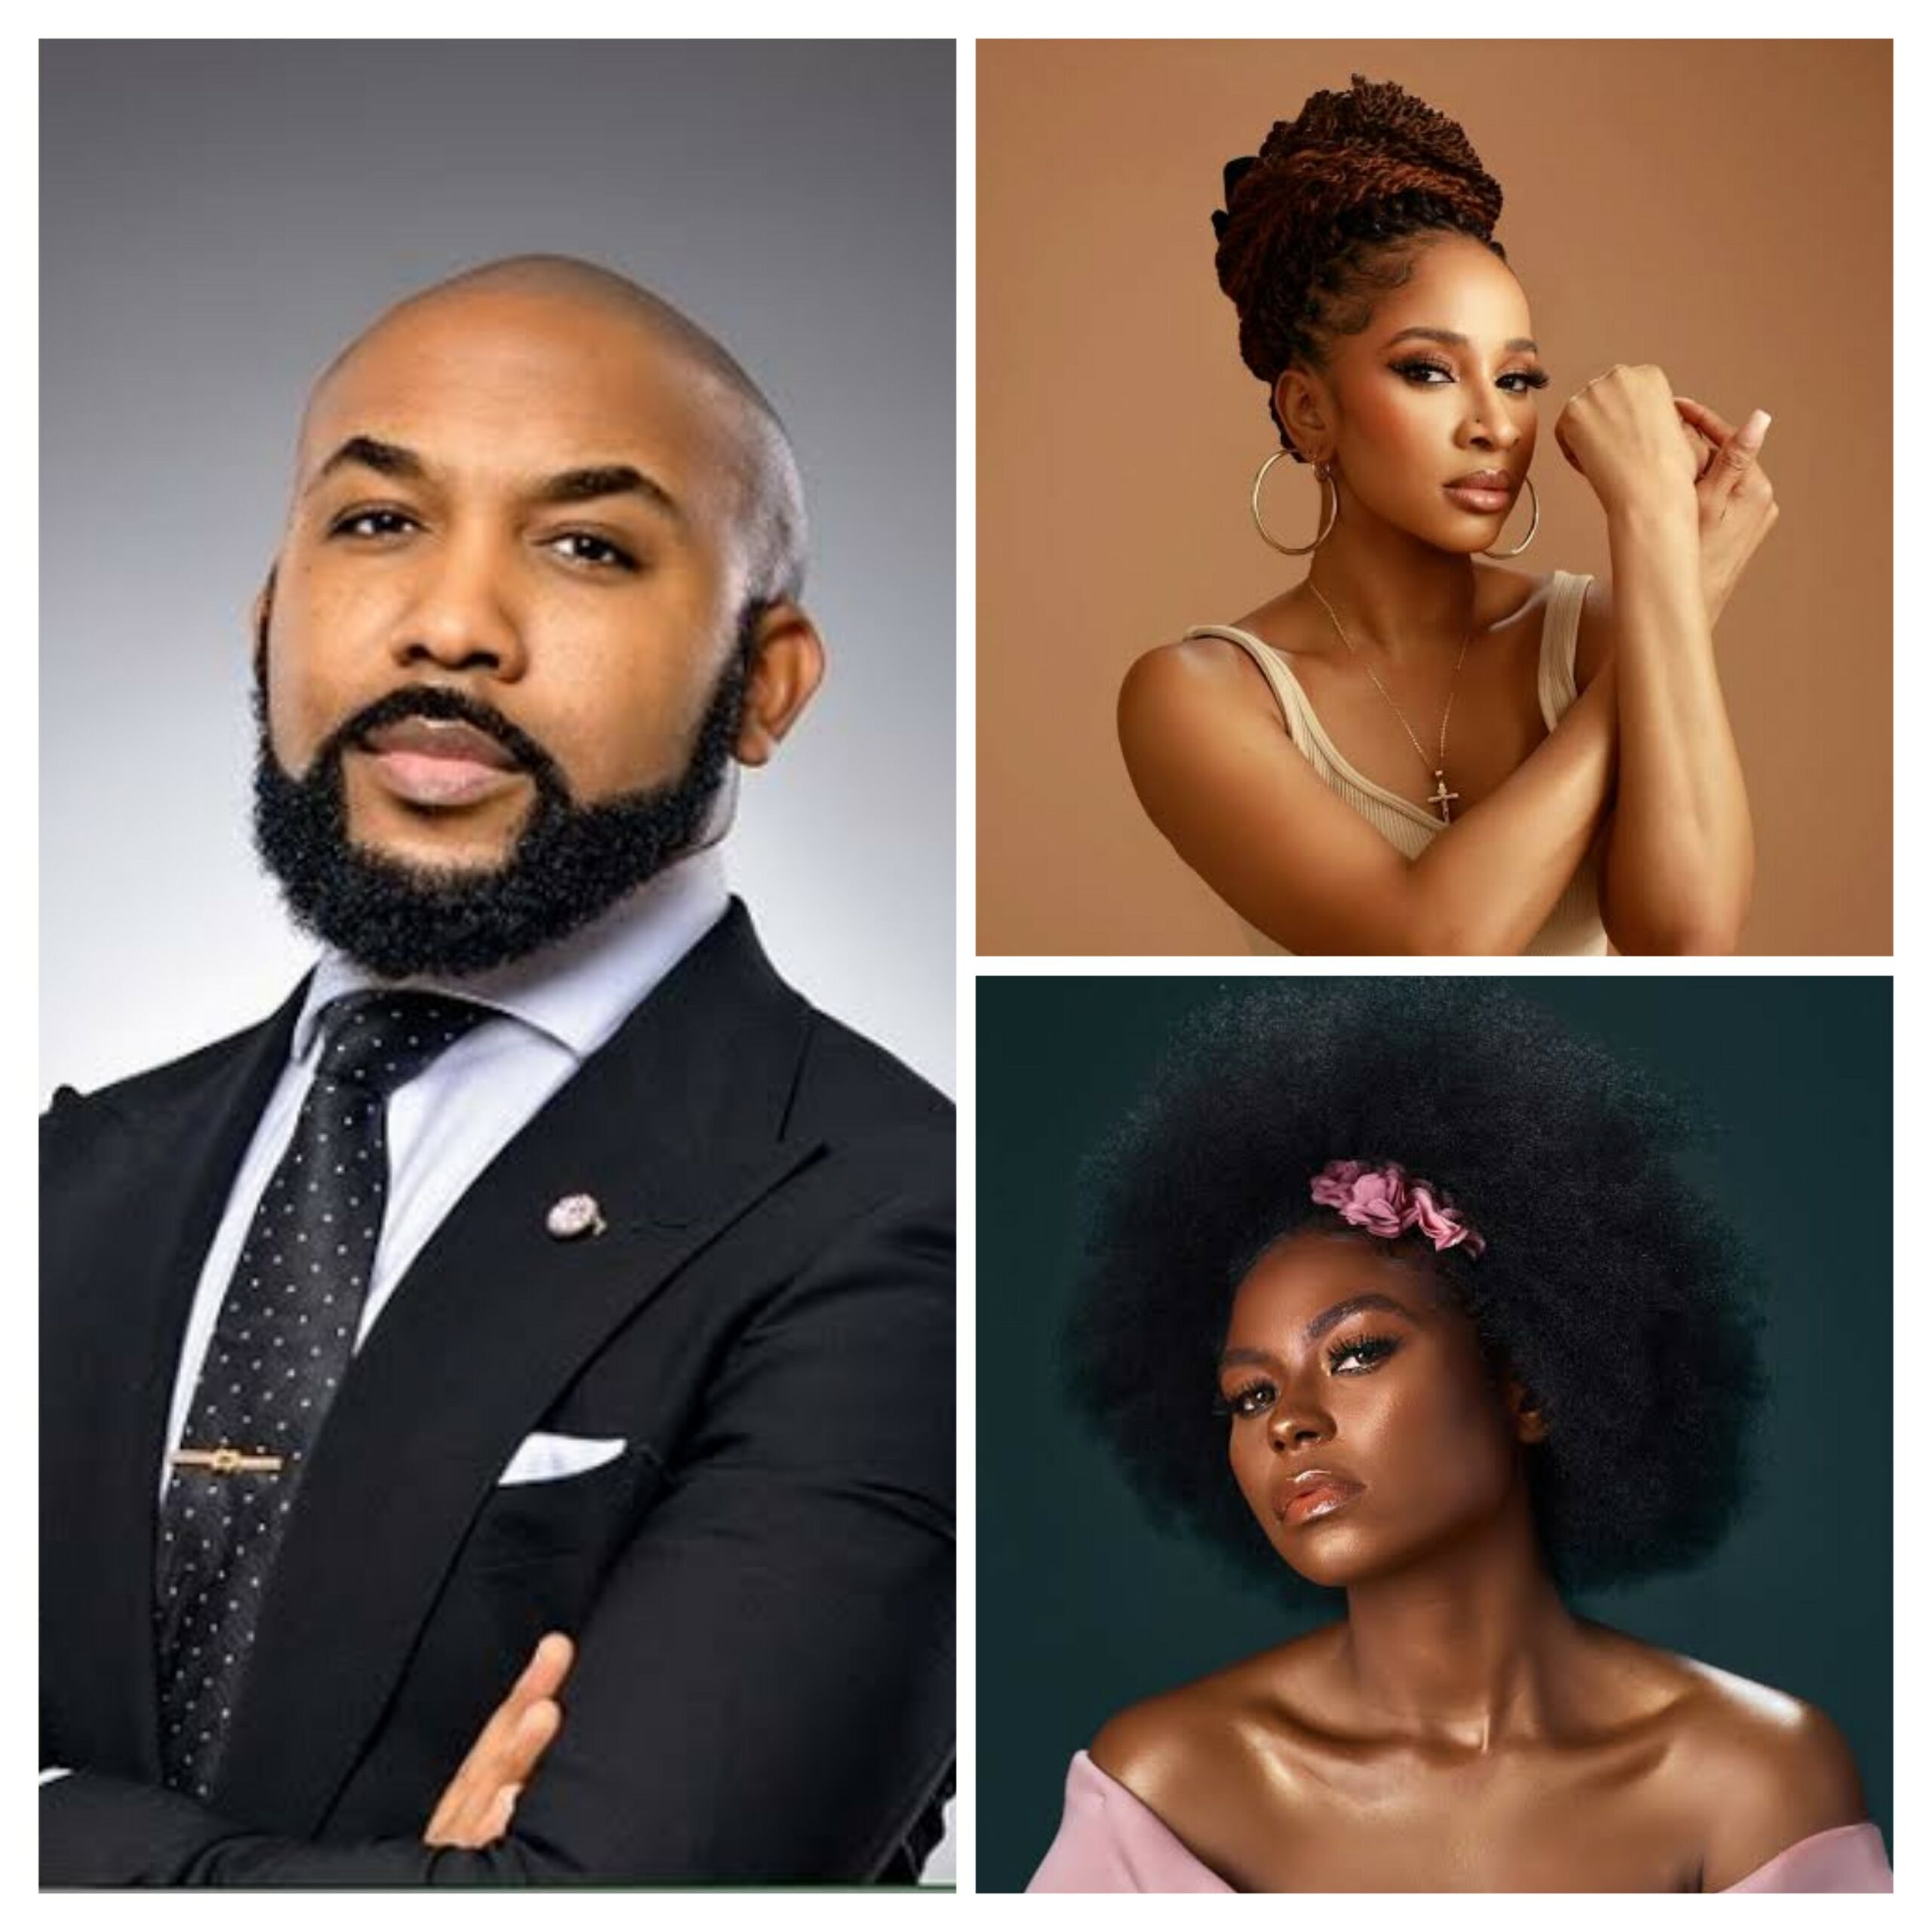 Banky W and Adesua Etomi: How They Survived Infertility, Miscarriage, and Cheating Rumors